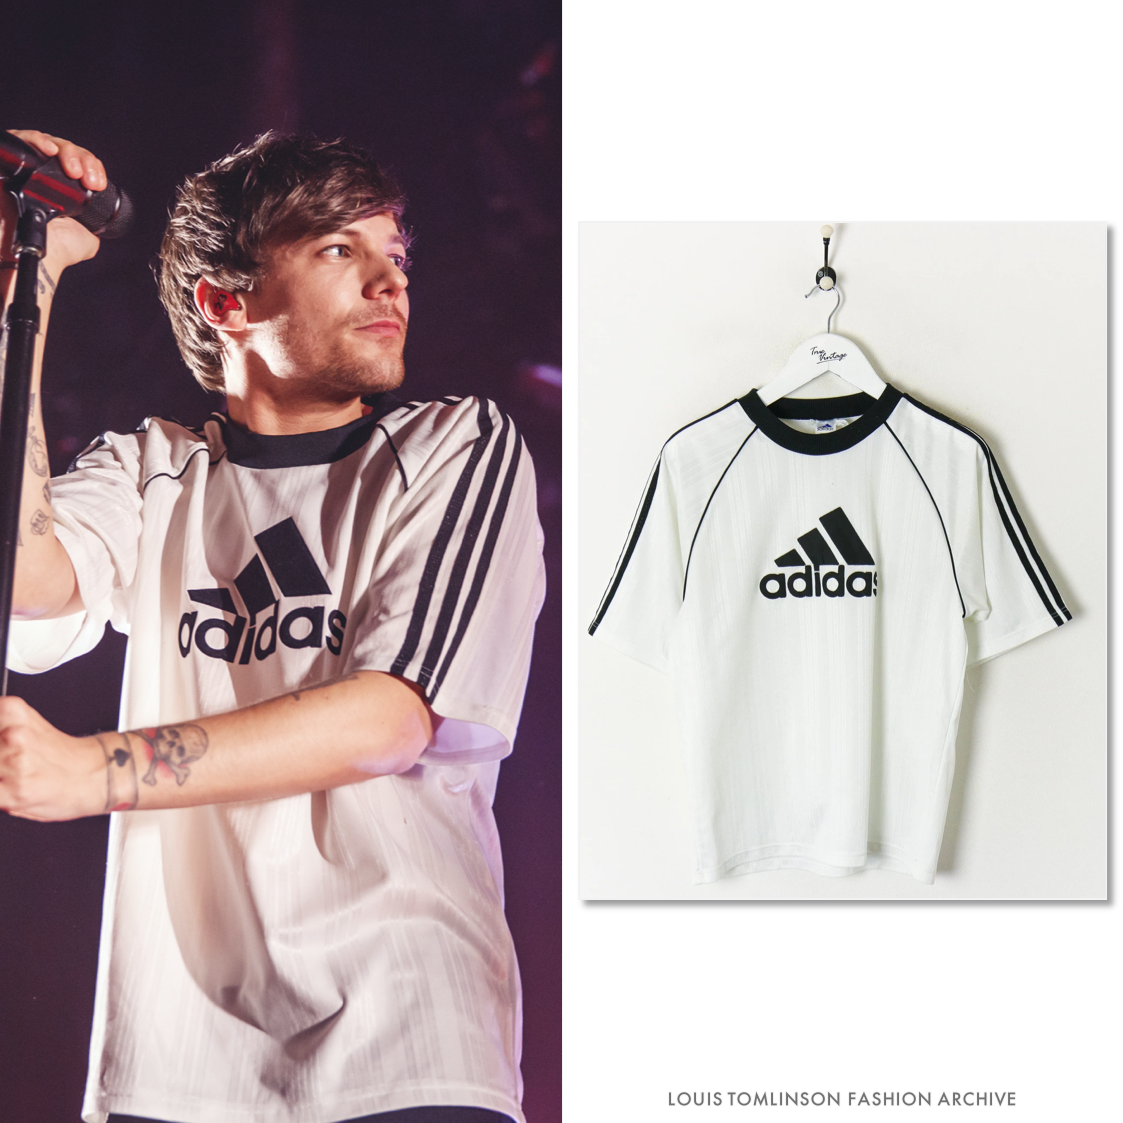 Louis Tomlinson Fashion Archive — Louis performing in Madrid